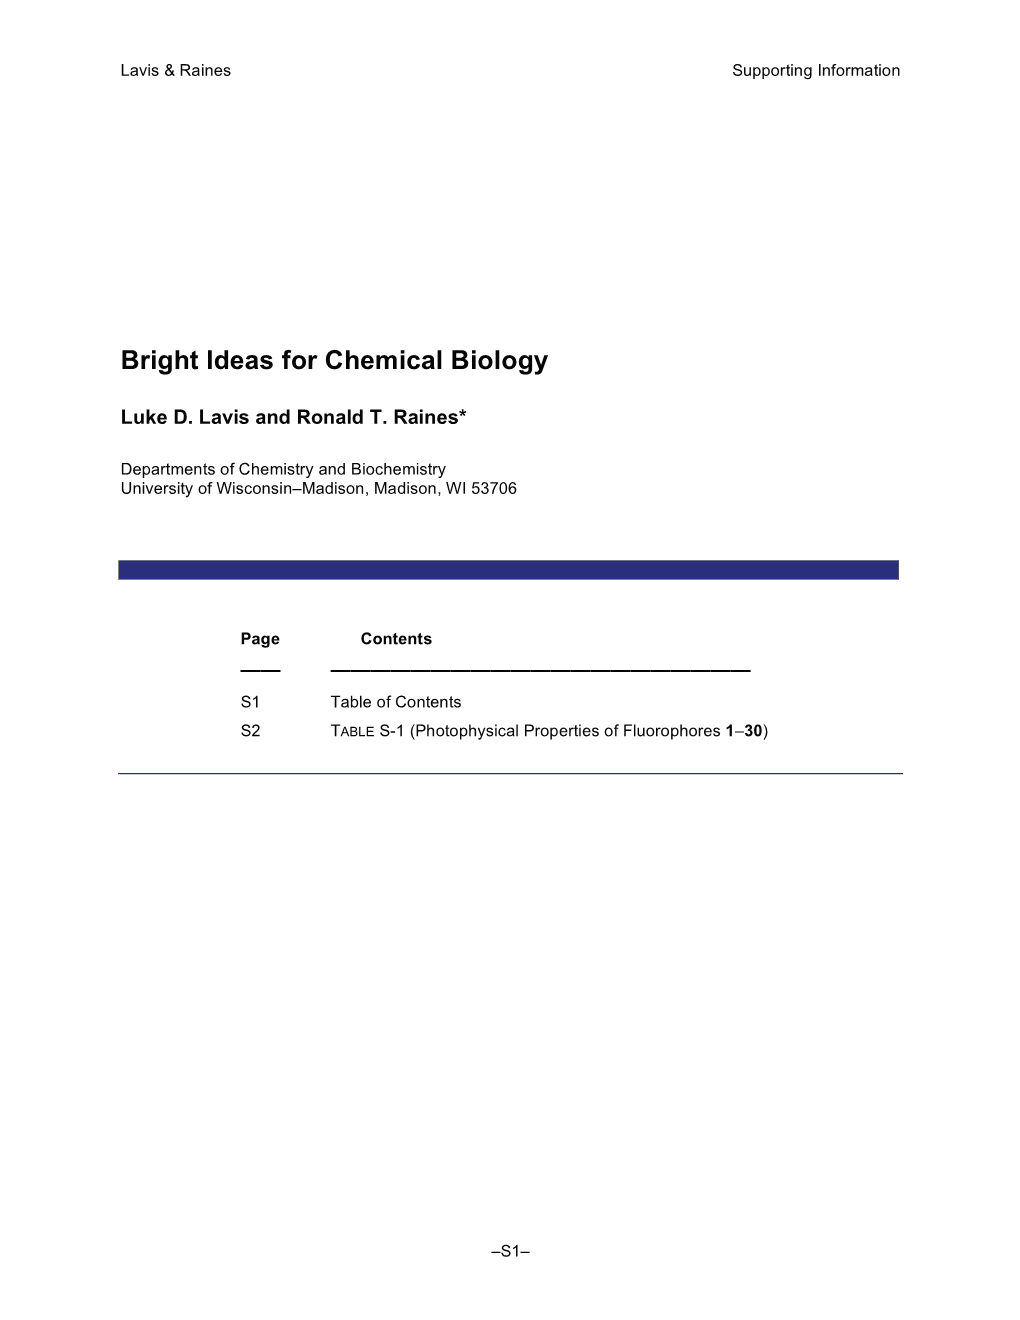 Bright Ideas for Chemical Biology